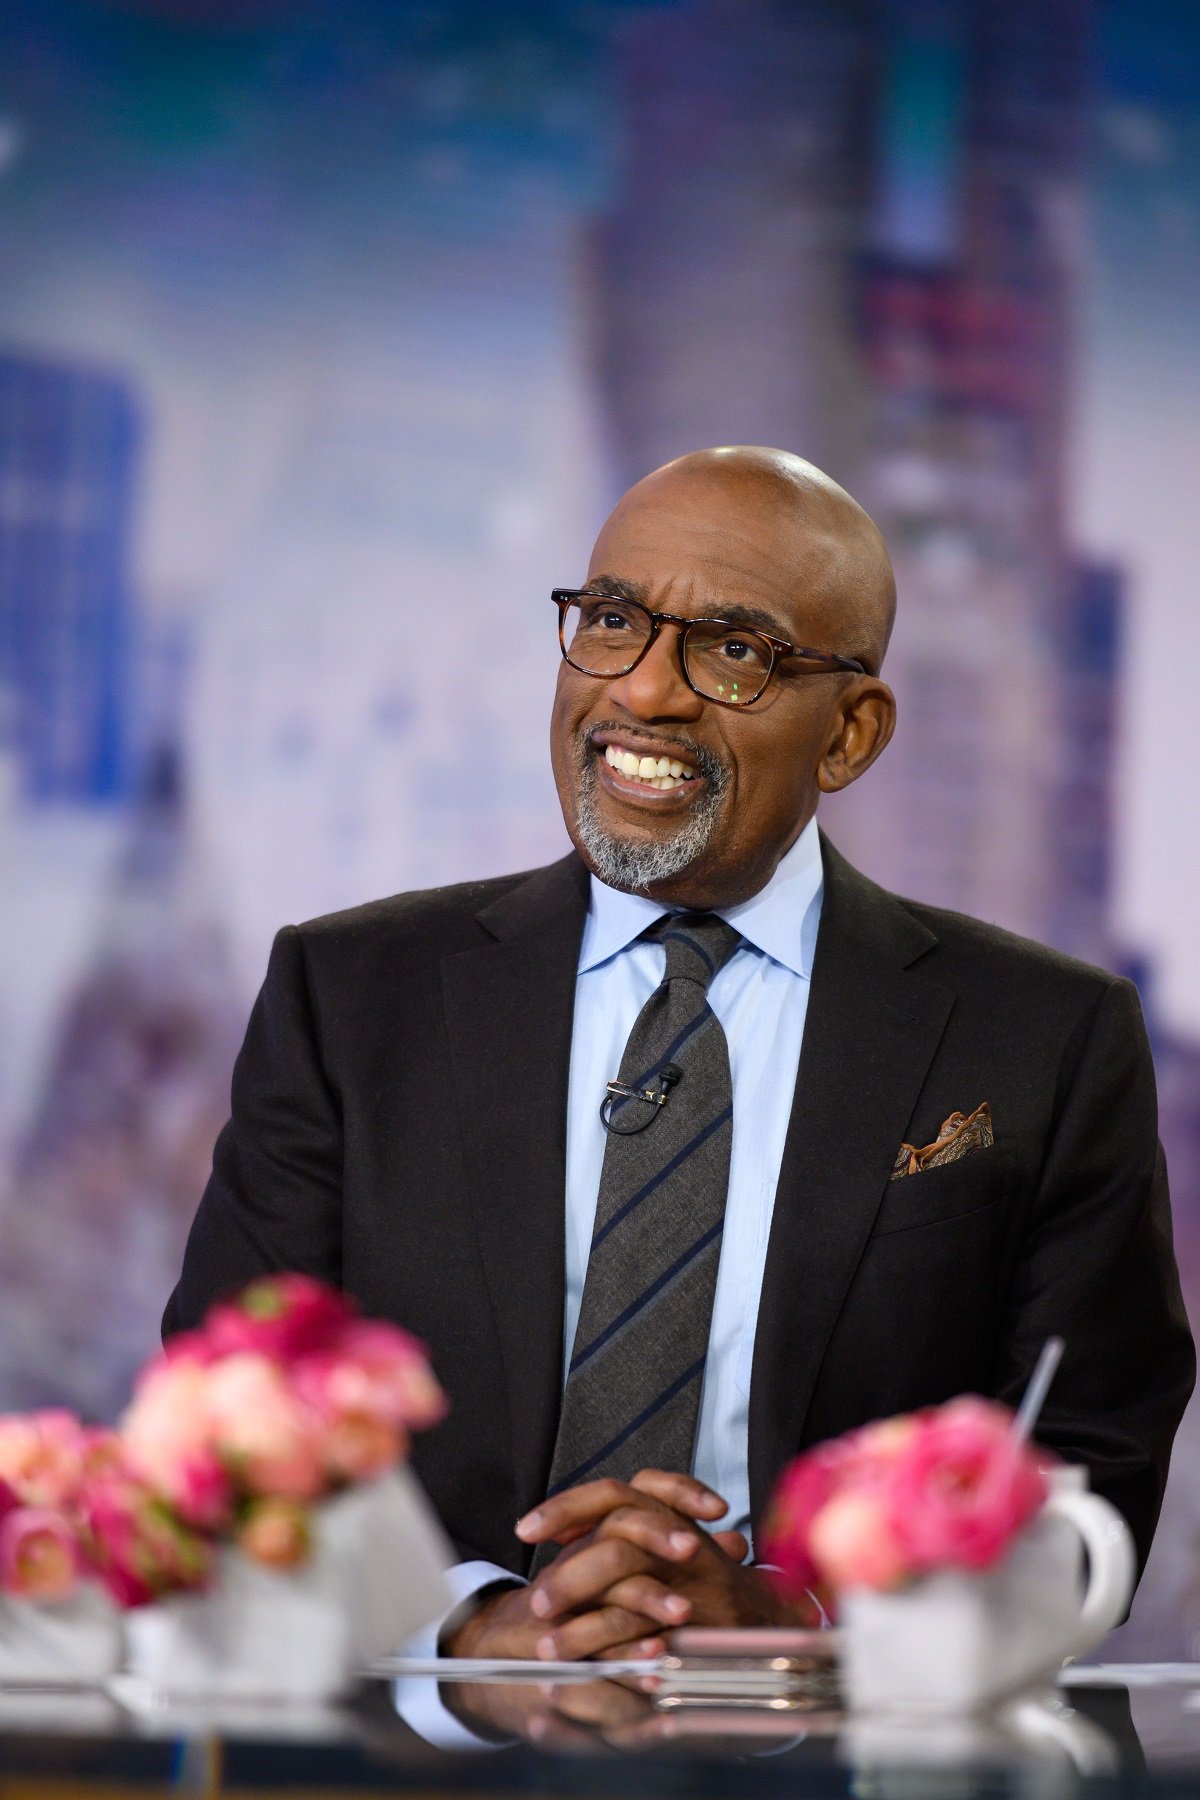 Al Roker on the "Today" show on February 11, 2020 | Photo: Nathan Congleton/NBC/NBCU Photo Bank/Getty Images